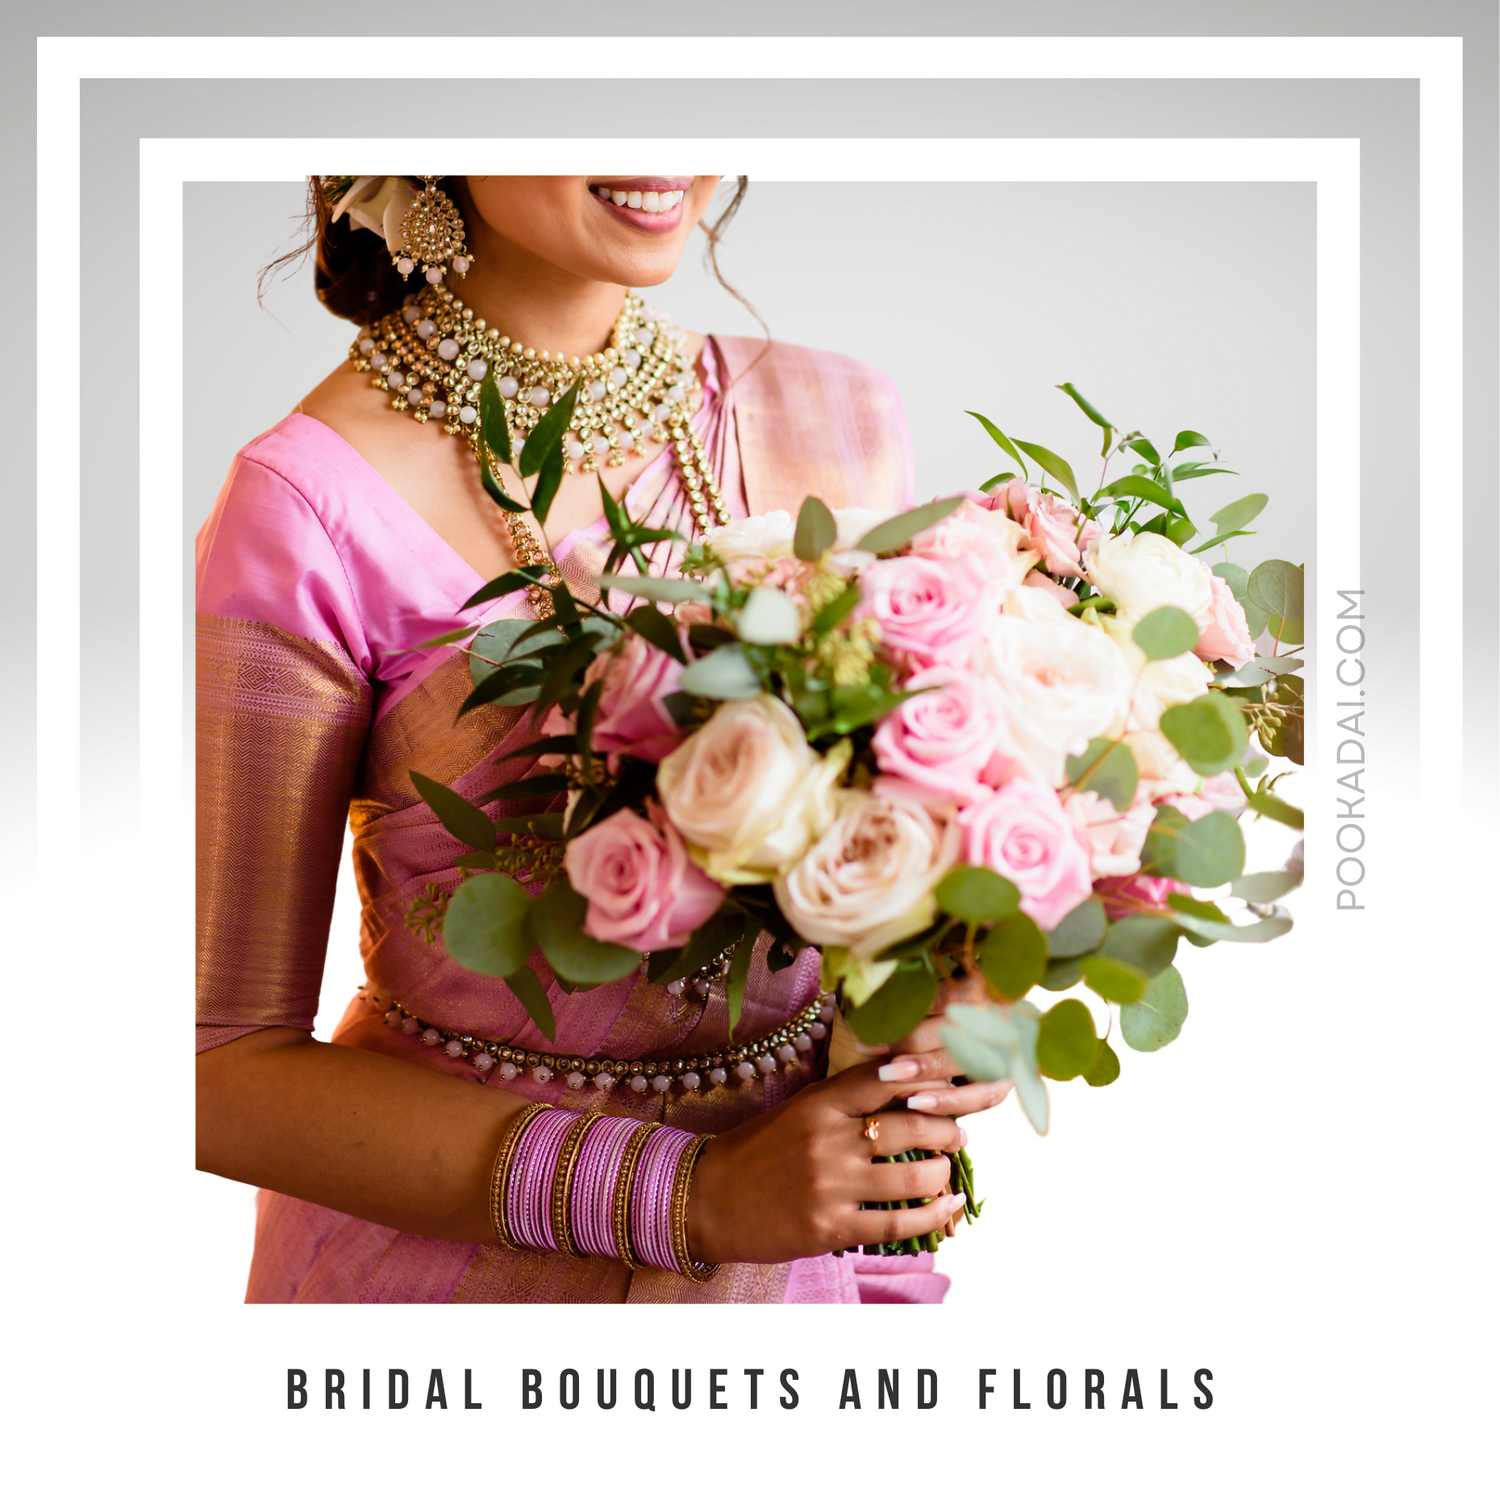 Bridal Bouquets and Florals